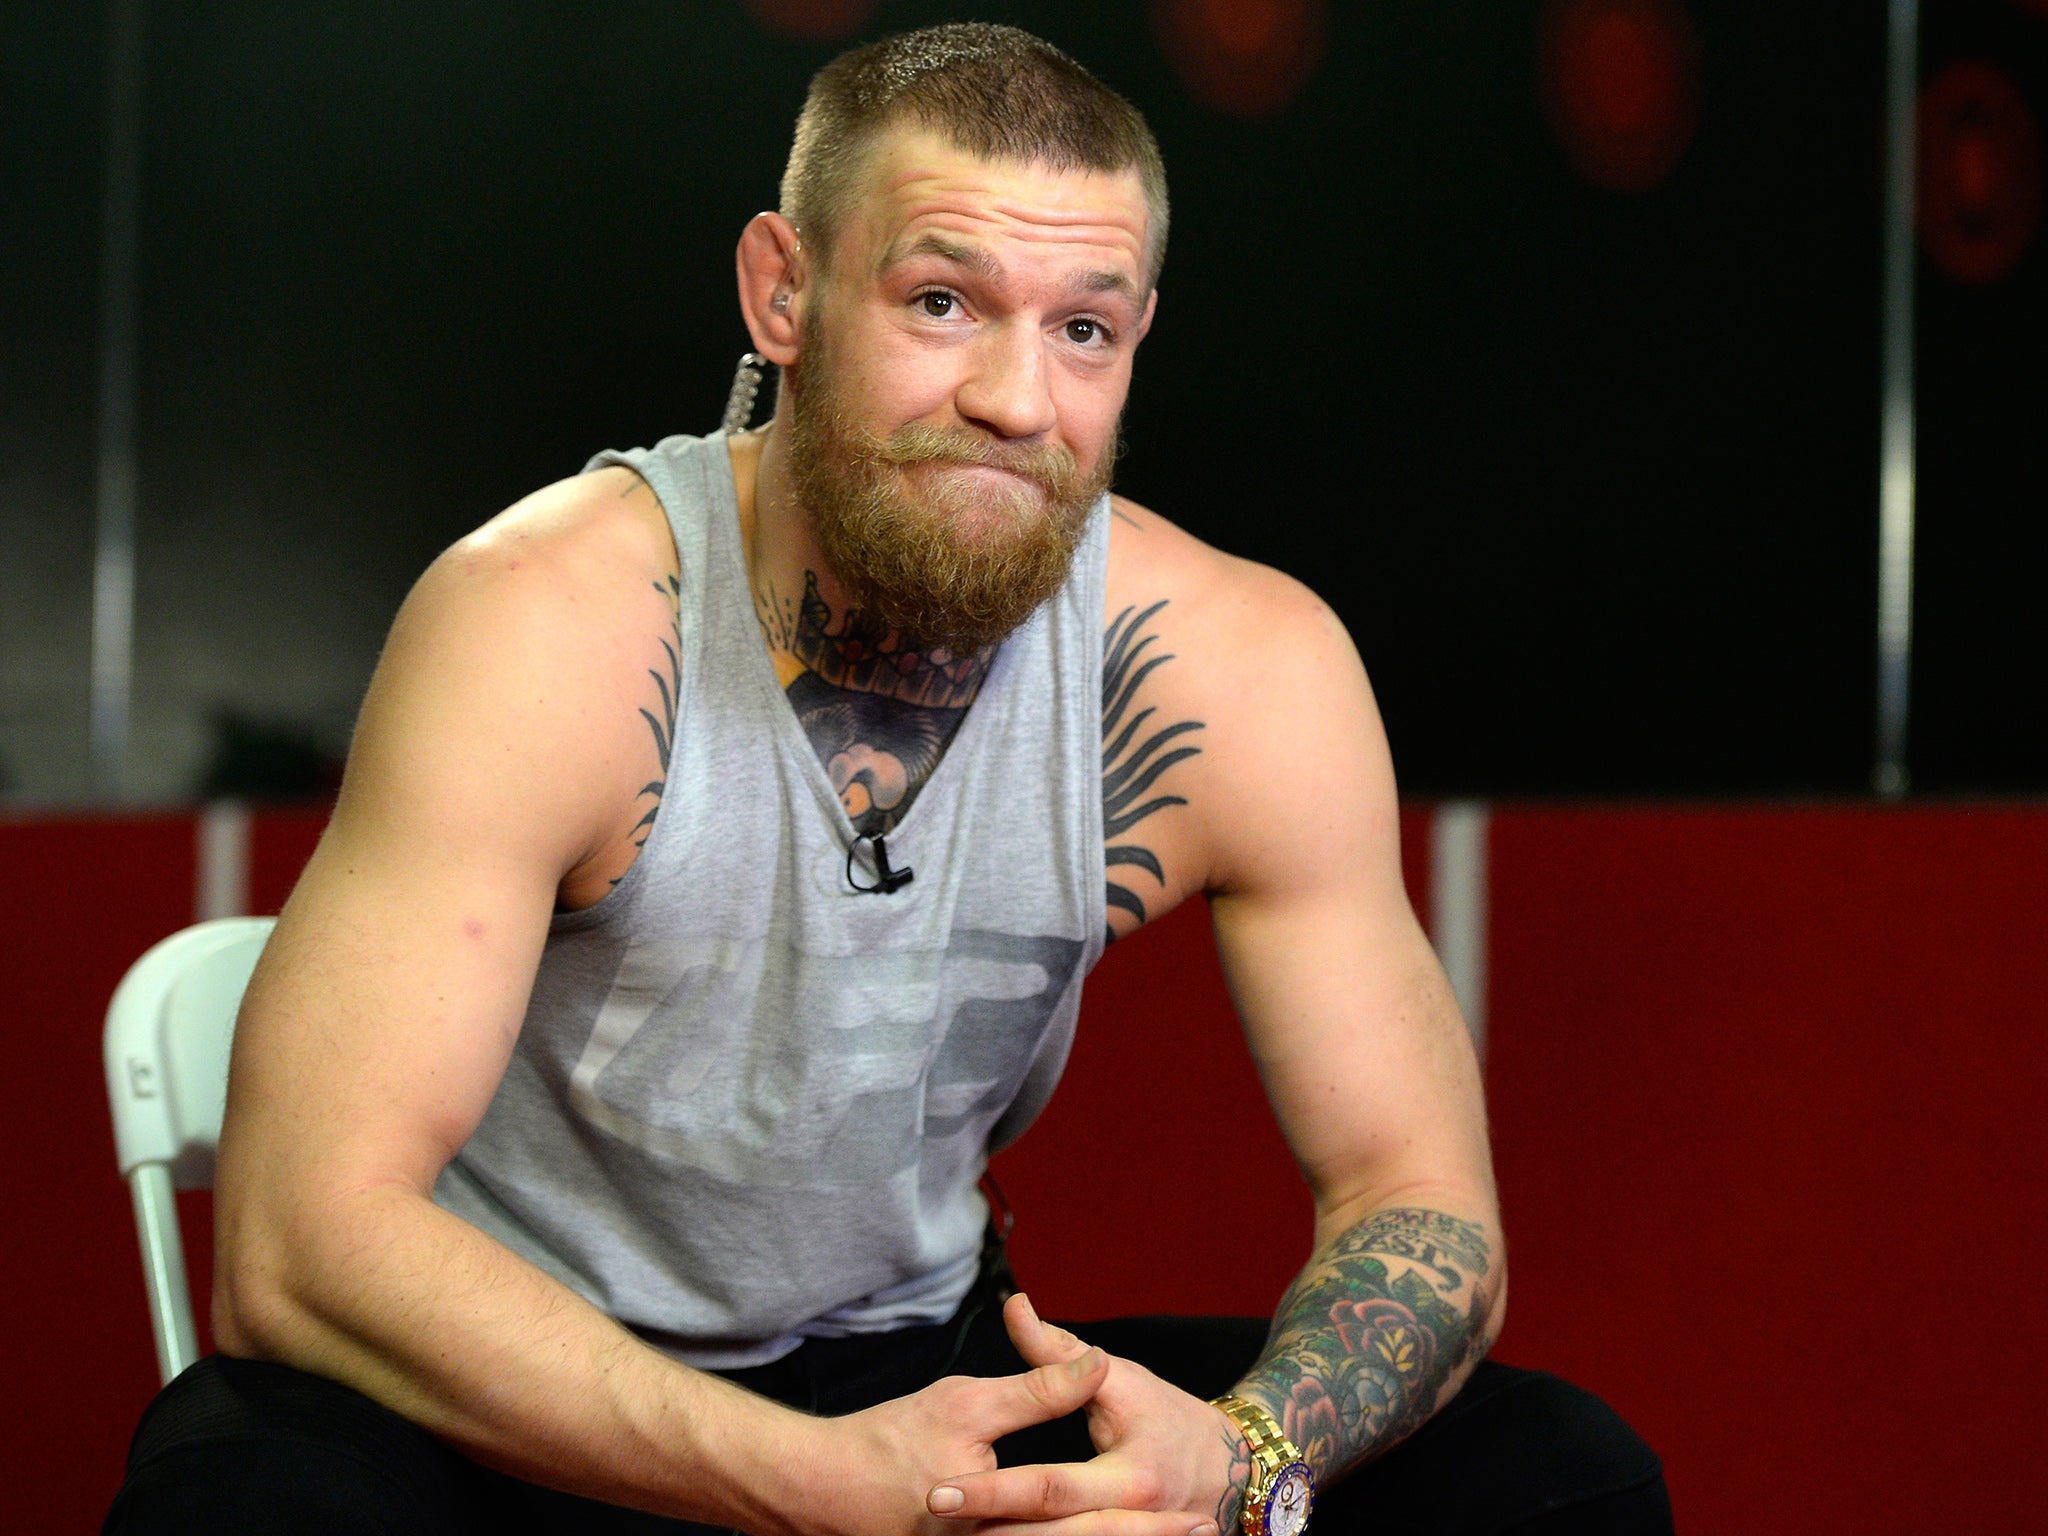 Conor McGregor has talked up the prospect of fighting Floyd Mayweather